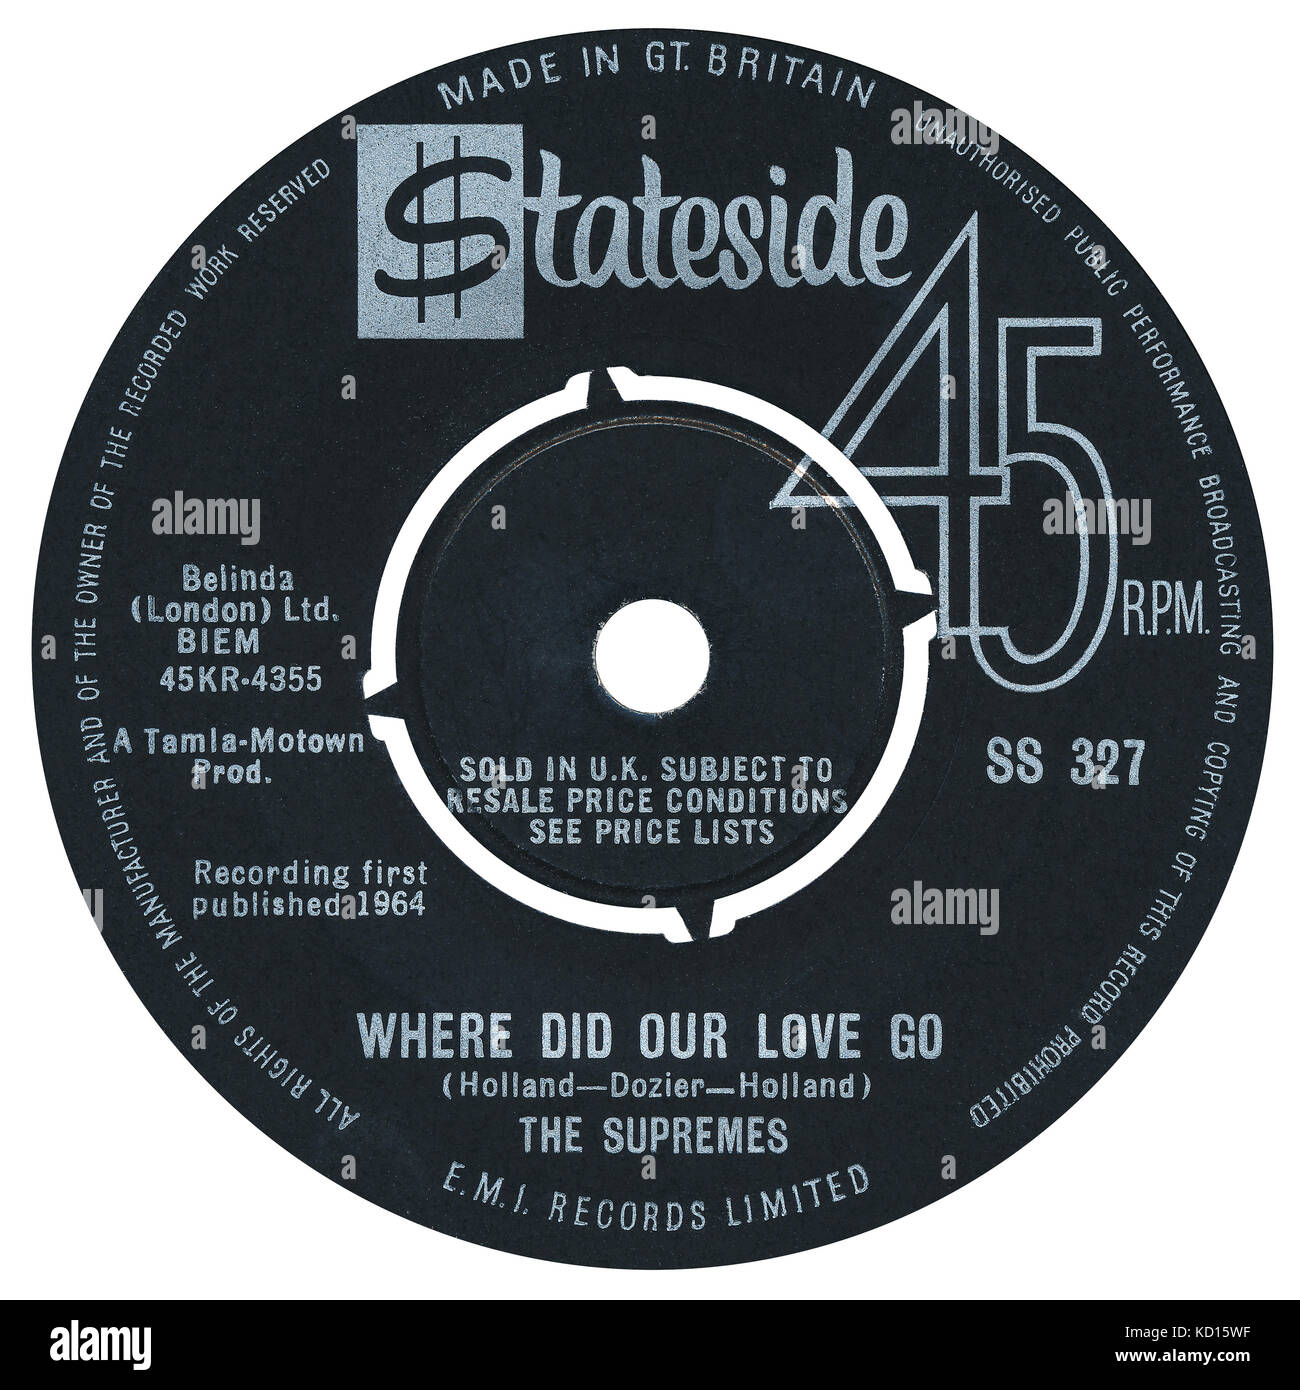 45 RPM 7' UK record label of Where Did Our Love Go by The Supremes on the Stateside label from 1964. The Supremes on this record (before the Tamla Motown label was set up in the UK) were Diana Ross, Mary Wilson and Florence Ballard. Stock Photo